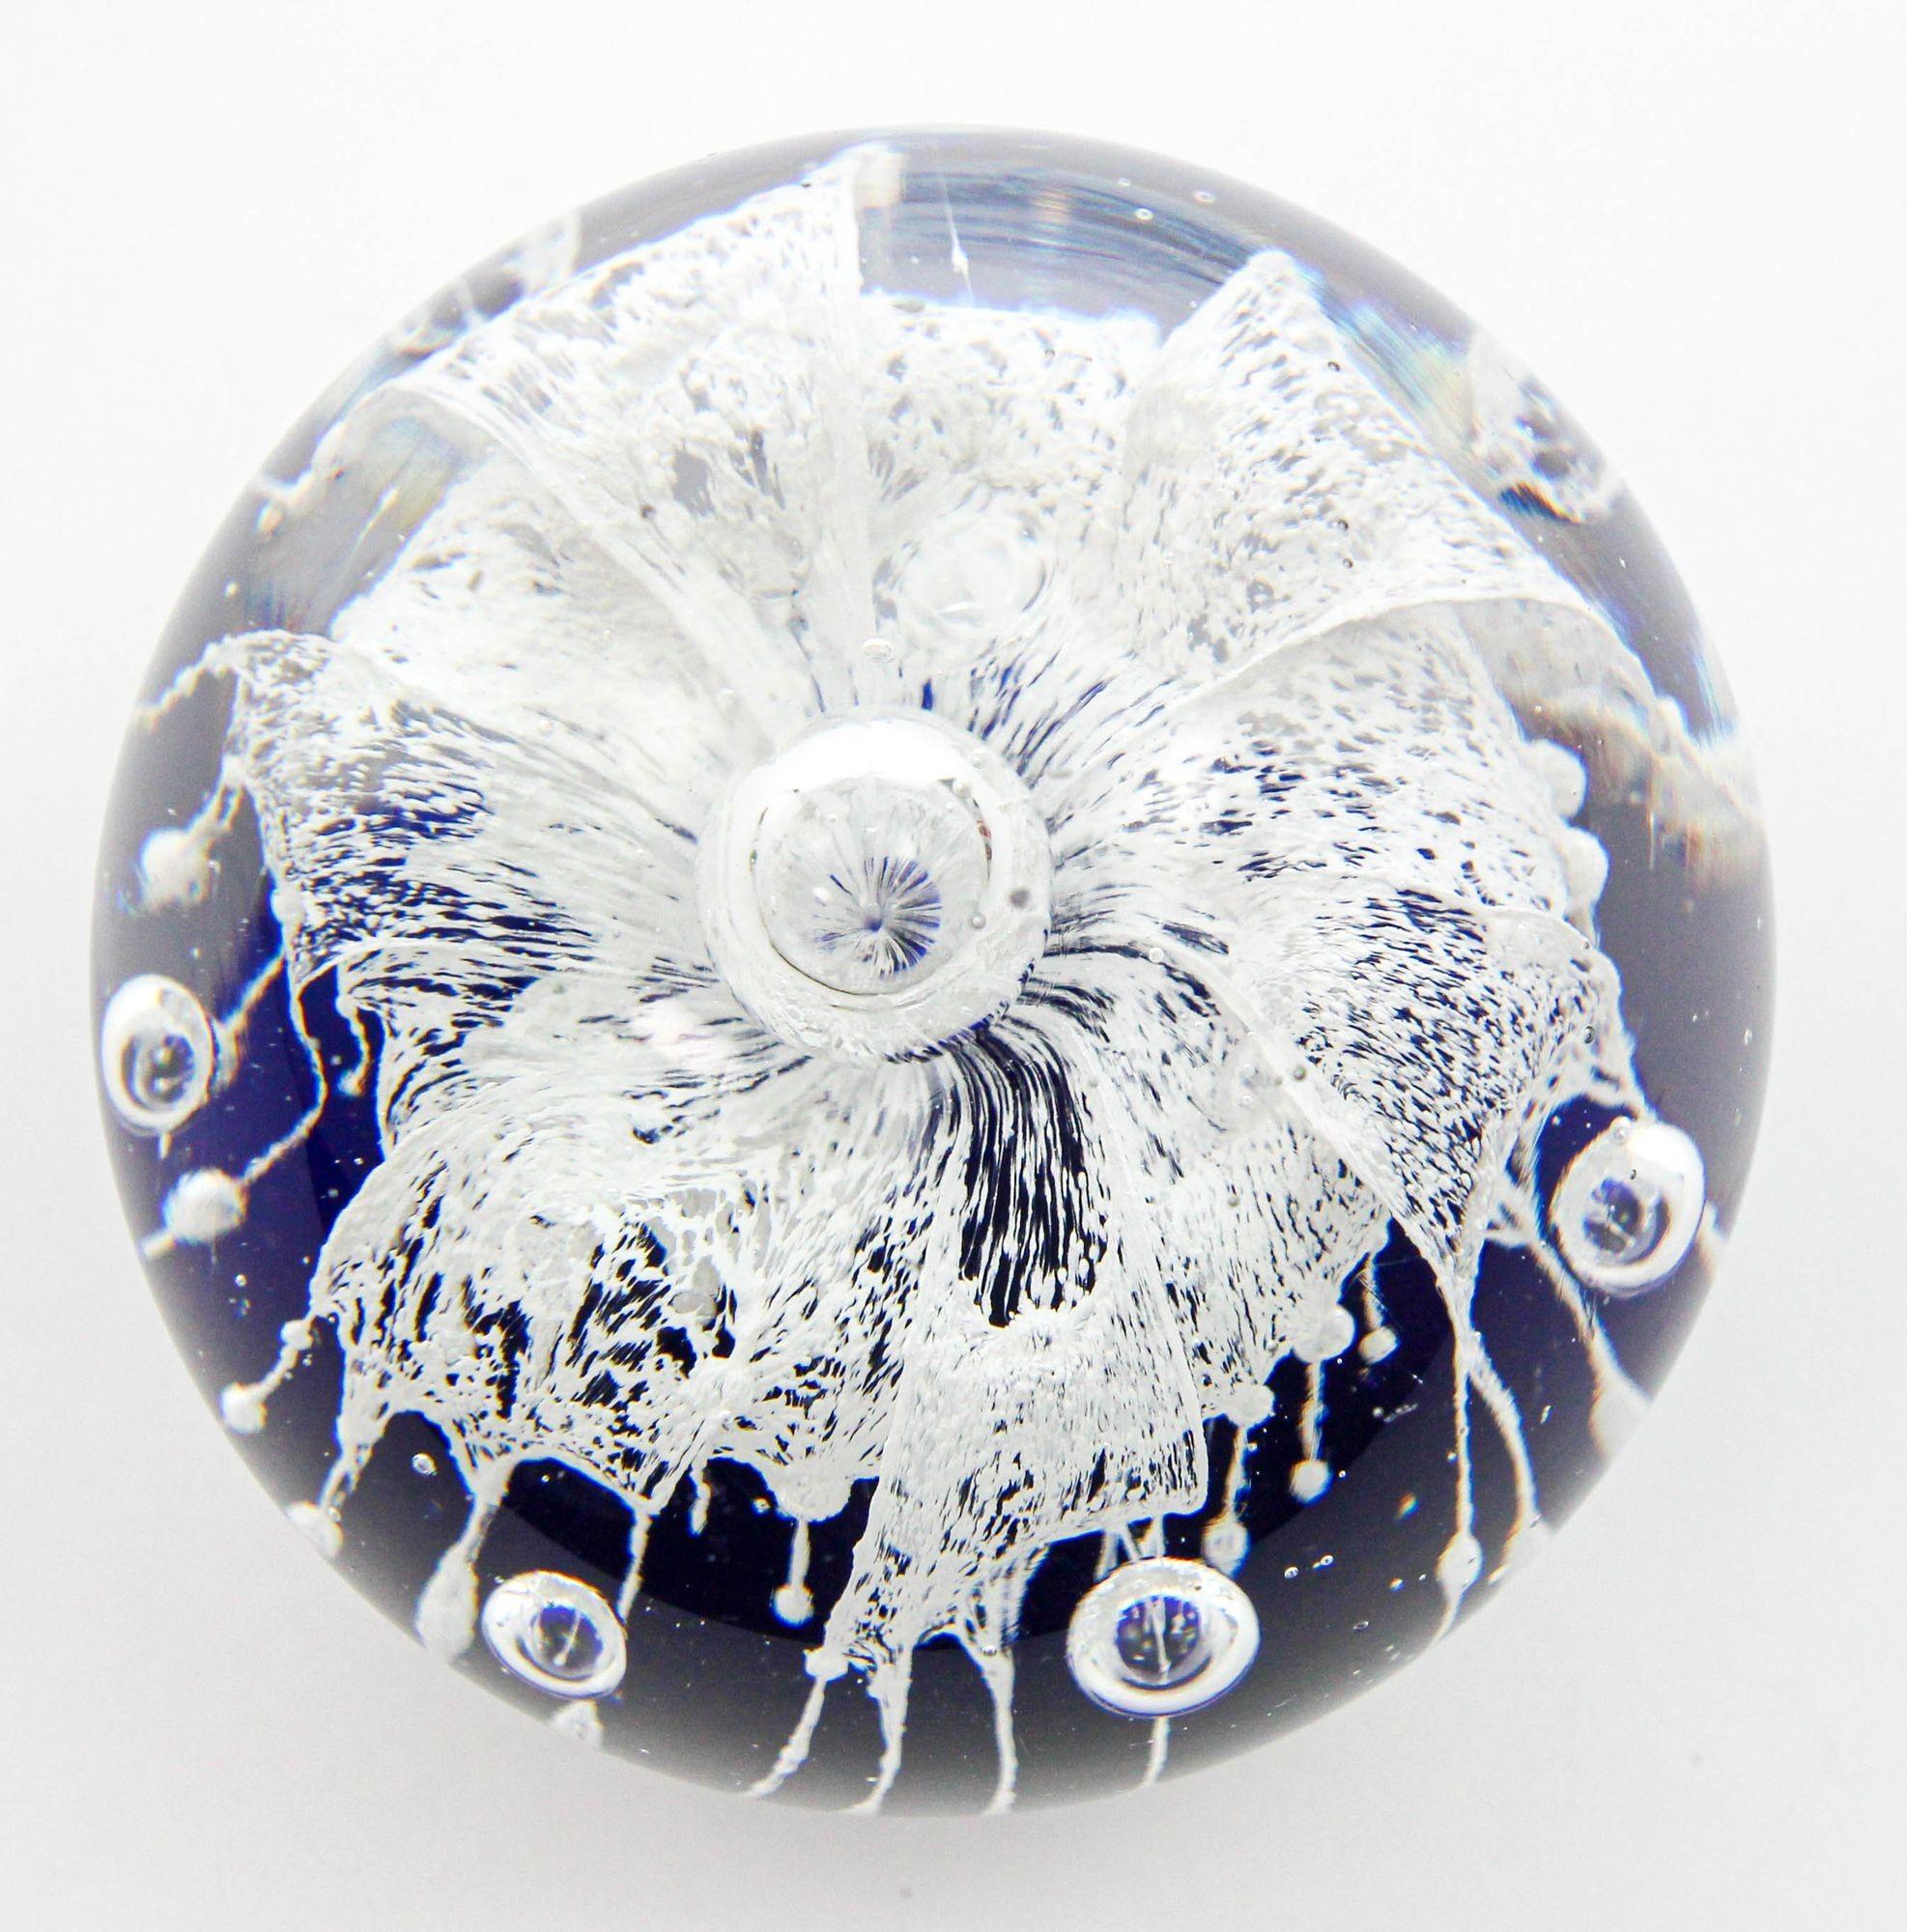 Vintage beautiful and colorful vintage Murano hand blown blue and white Italian art glass paperweight.
Gorgeous vintage studio hand blown crystal art glass paperweight with a cobalt blue base and a white cascading flower or frost.
The inside of the